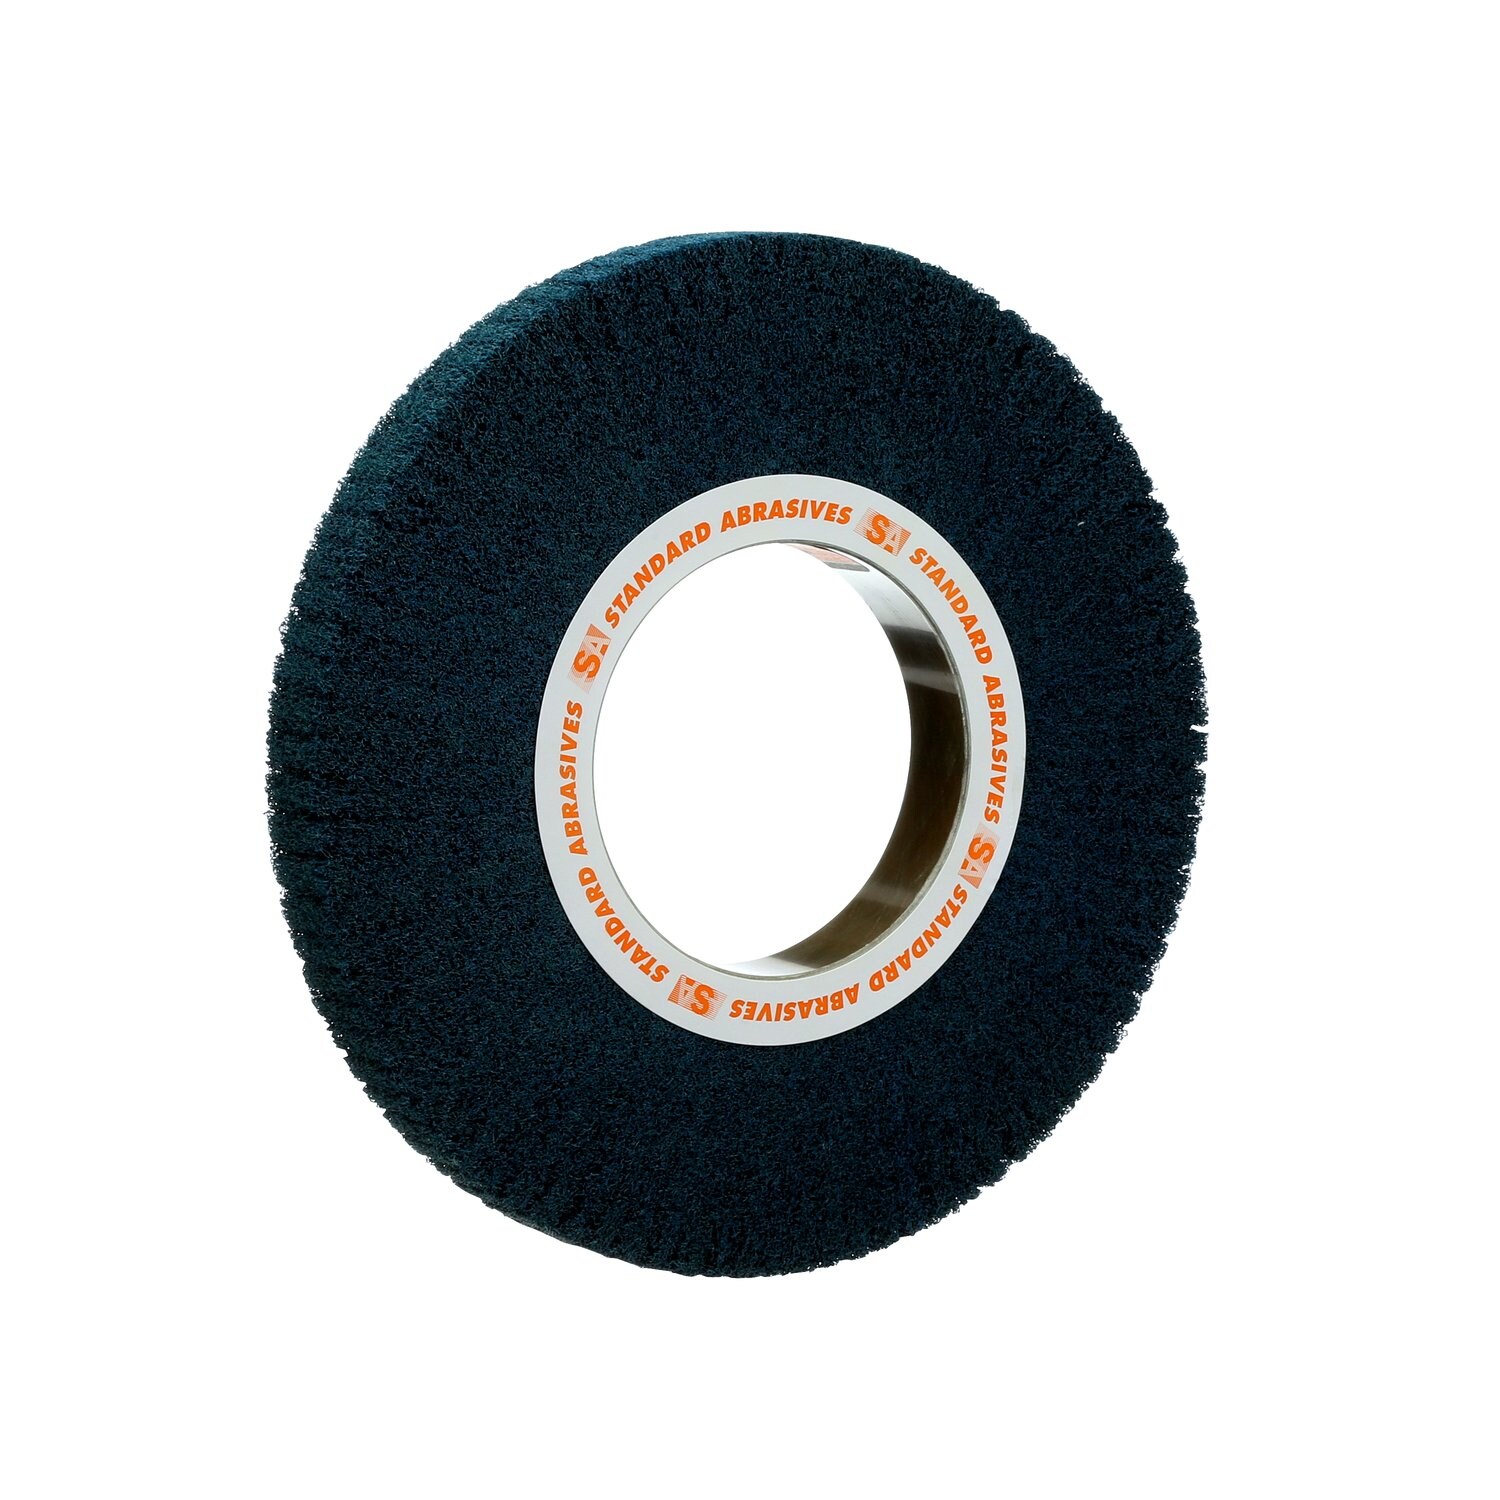 7010310690 - Standard Abrasives Buff and Blend HS Flap Brush 875371, 14 in x 1-1/2
in x 8 in FB119 23-11 HD A MED, 3 ea/Case